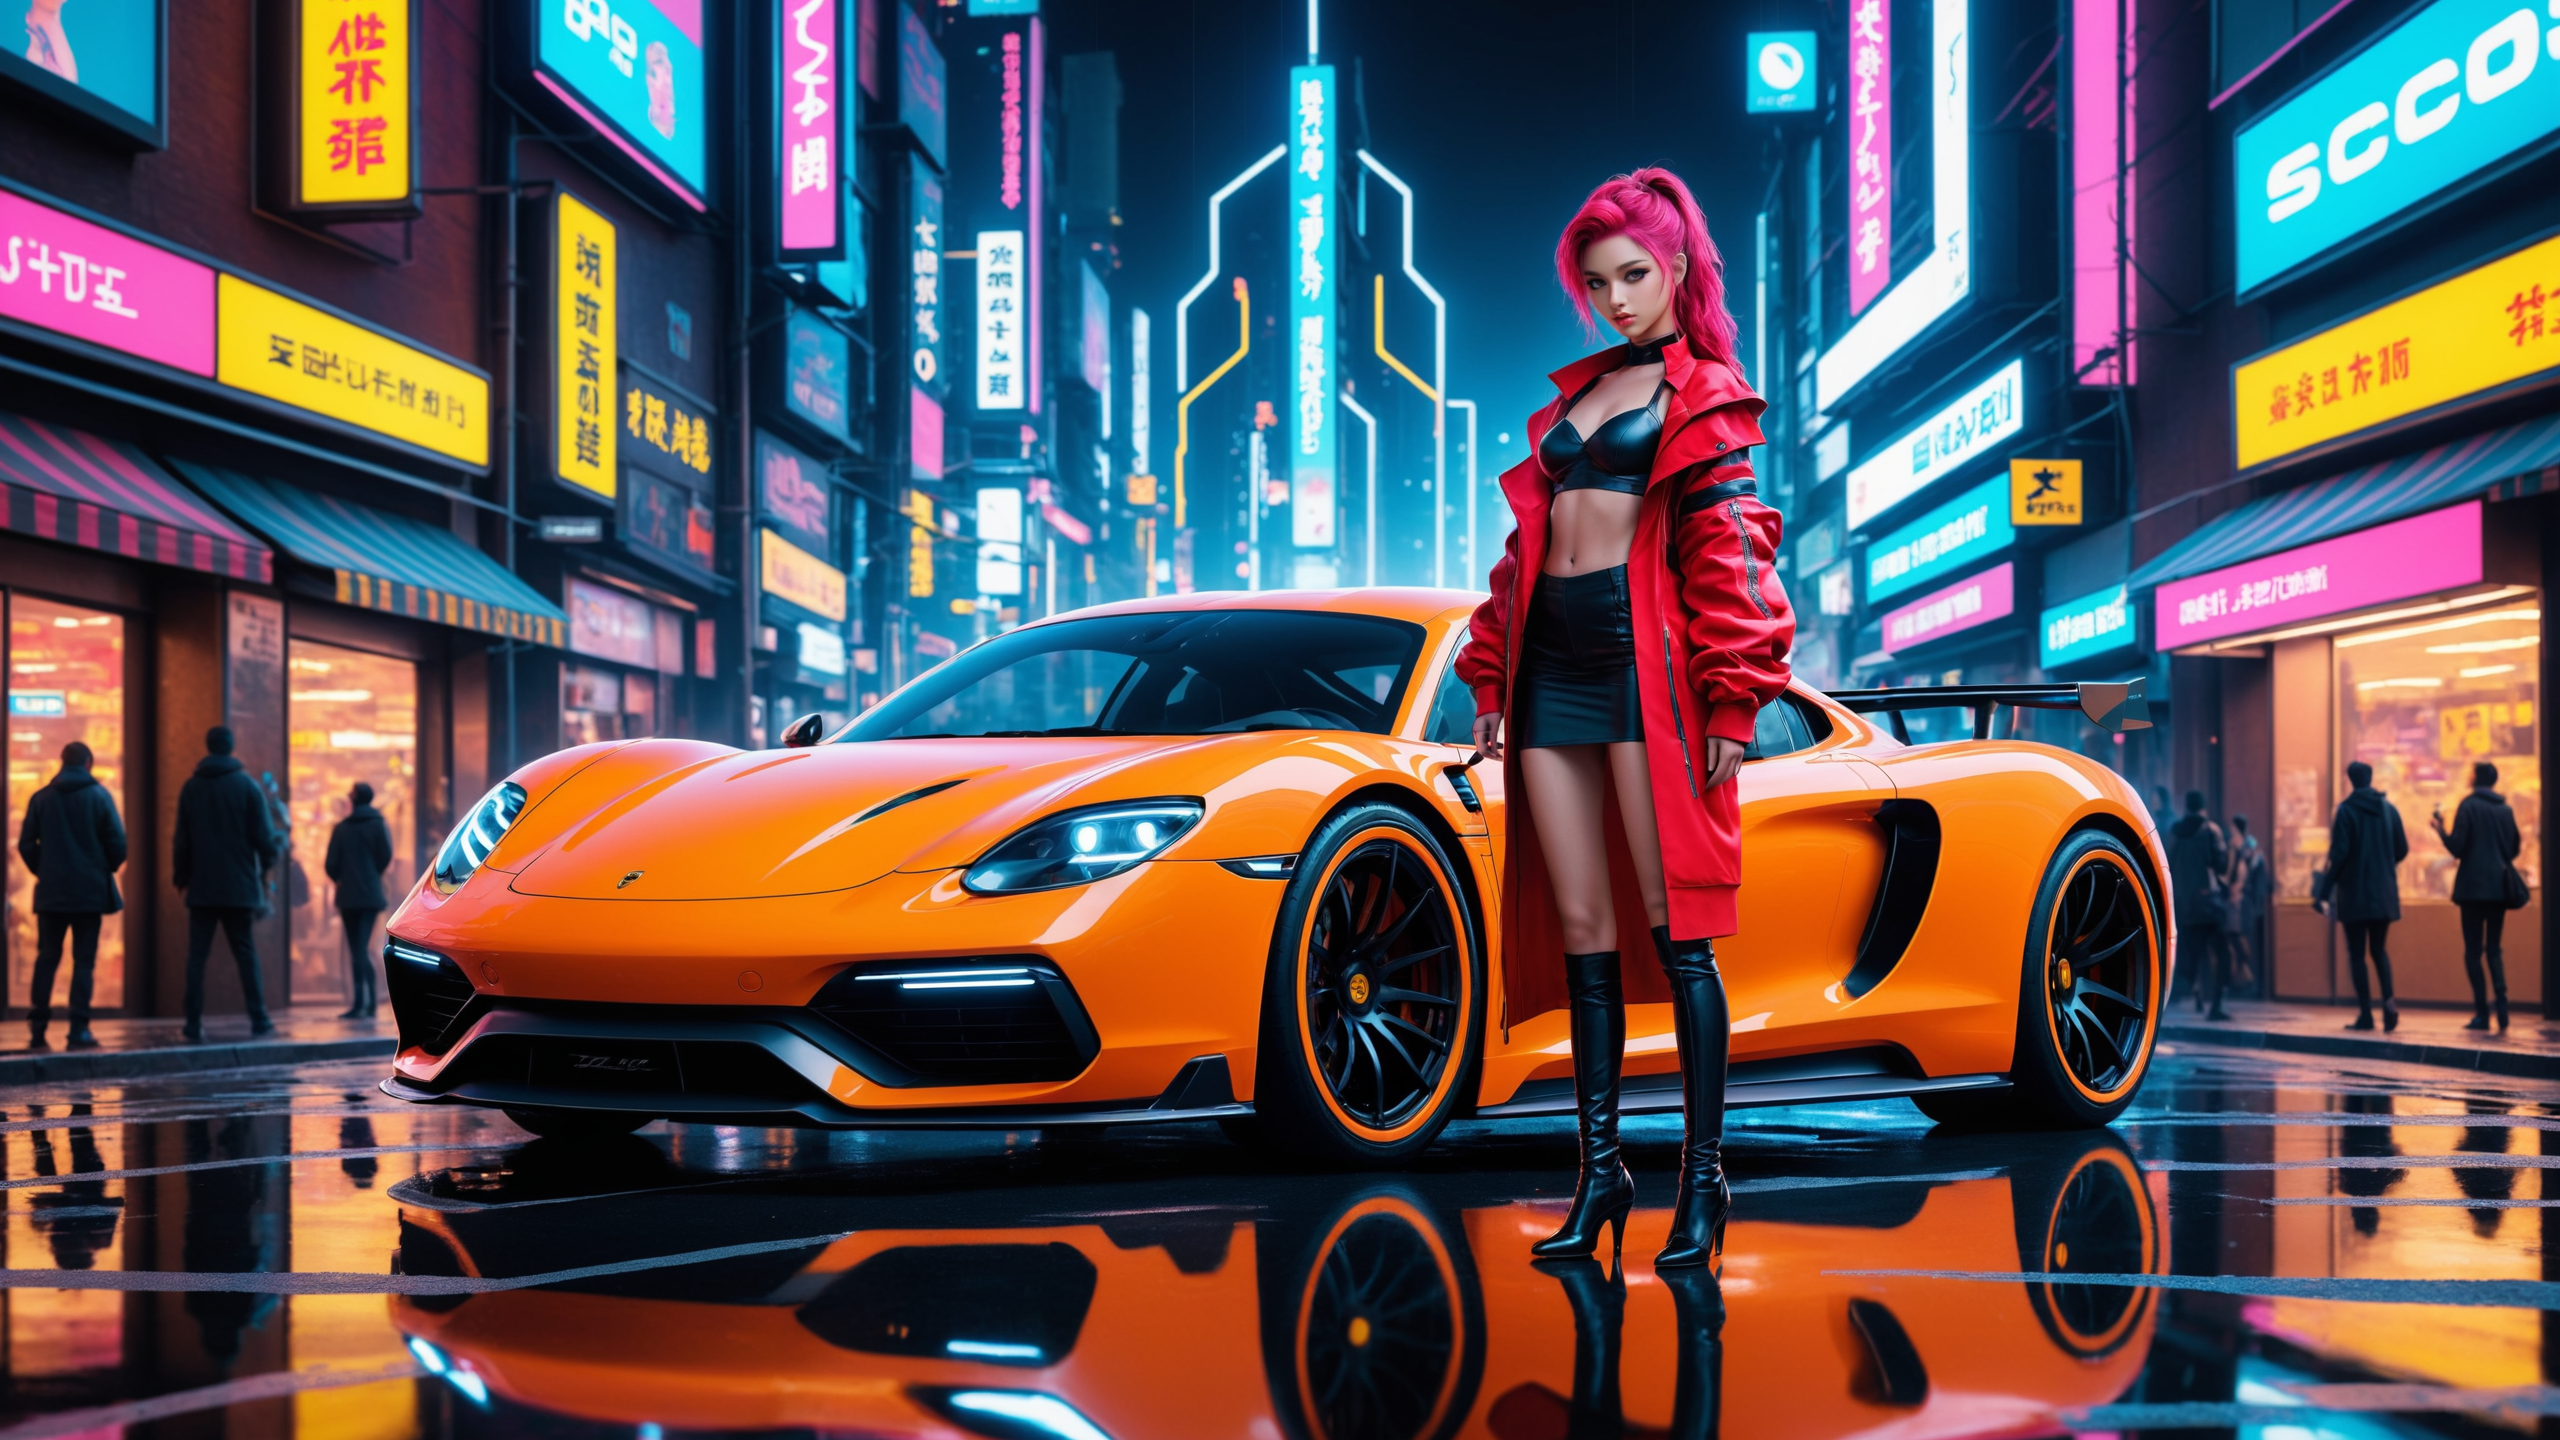 General 2560x1440 AI art Porsche neon women rain city night reflection car leather boots leather jacket orange cars headlights frontal view standing looking at viewer heels digital art sign vehicle high heeled boots